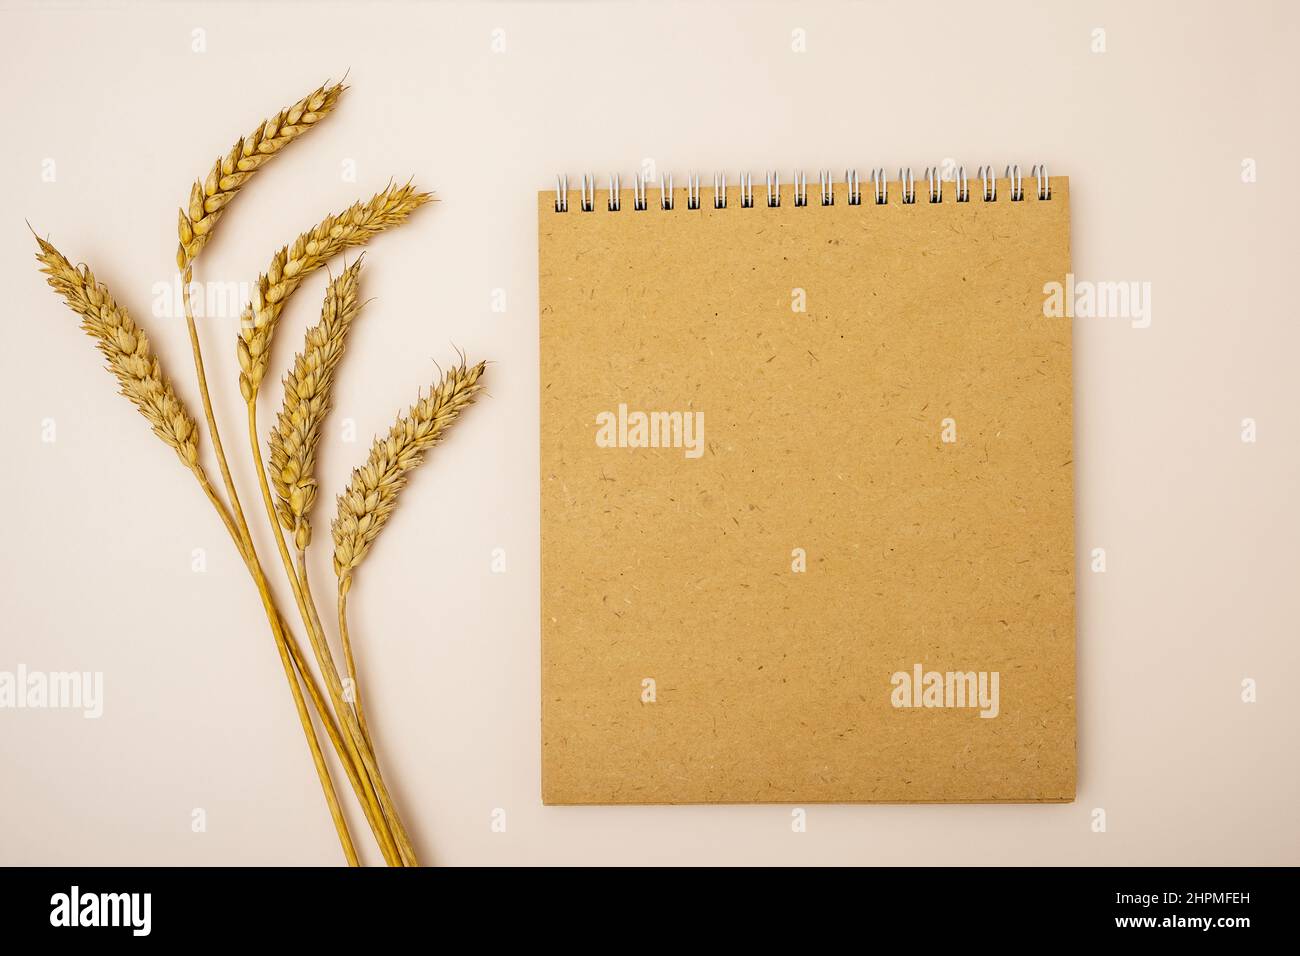 Ears of ripe wheat and recycled paper notepad on light background Stock Photo